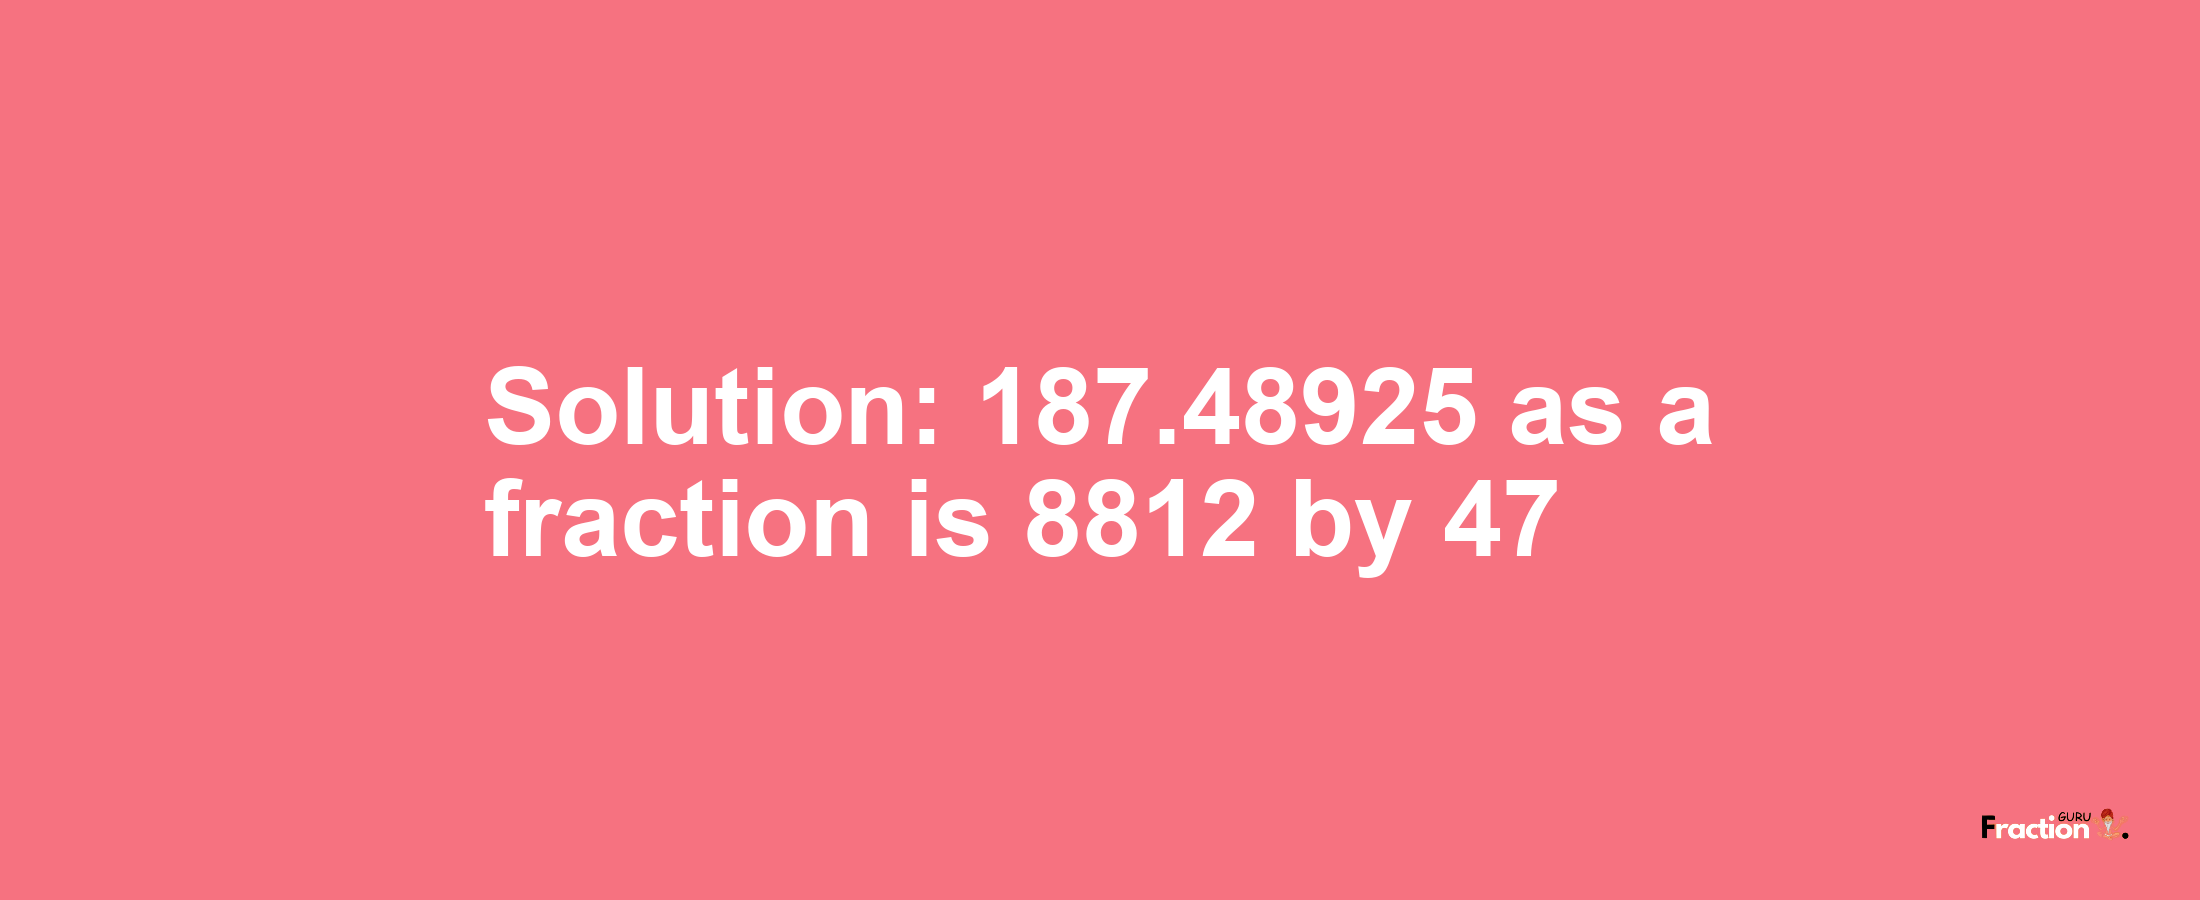 Solution:187.48925 as a fraction is 8812/47